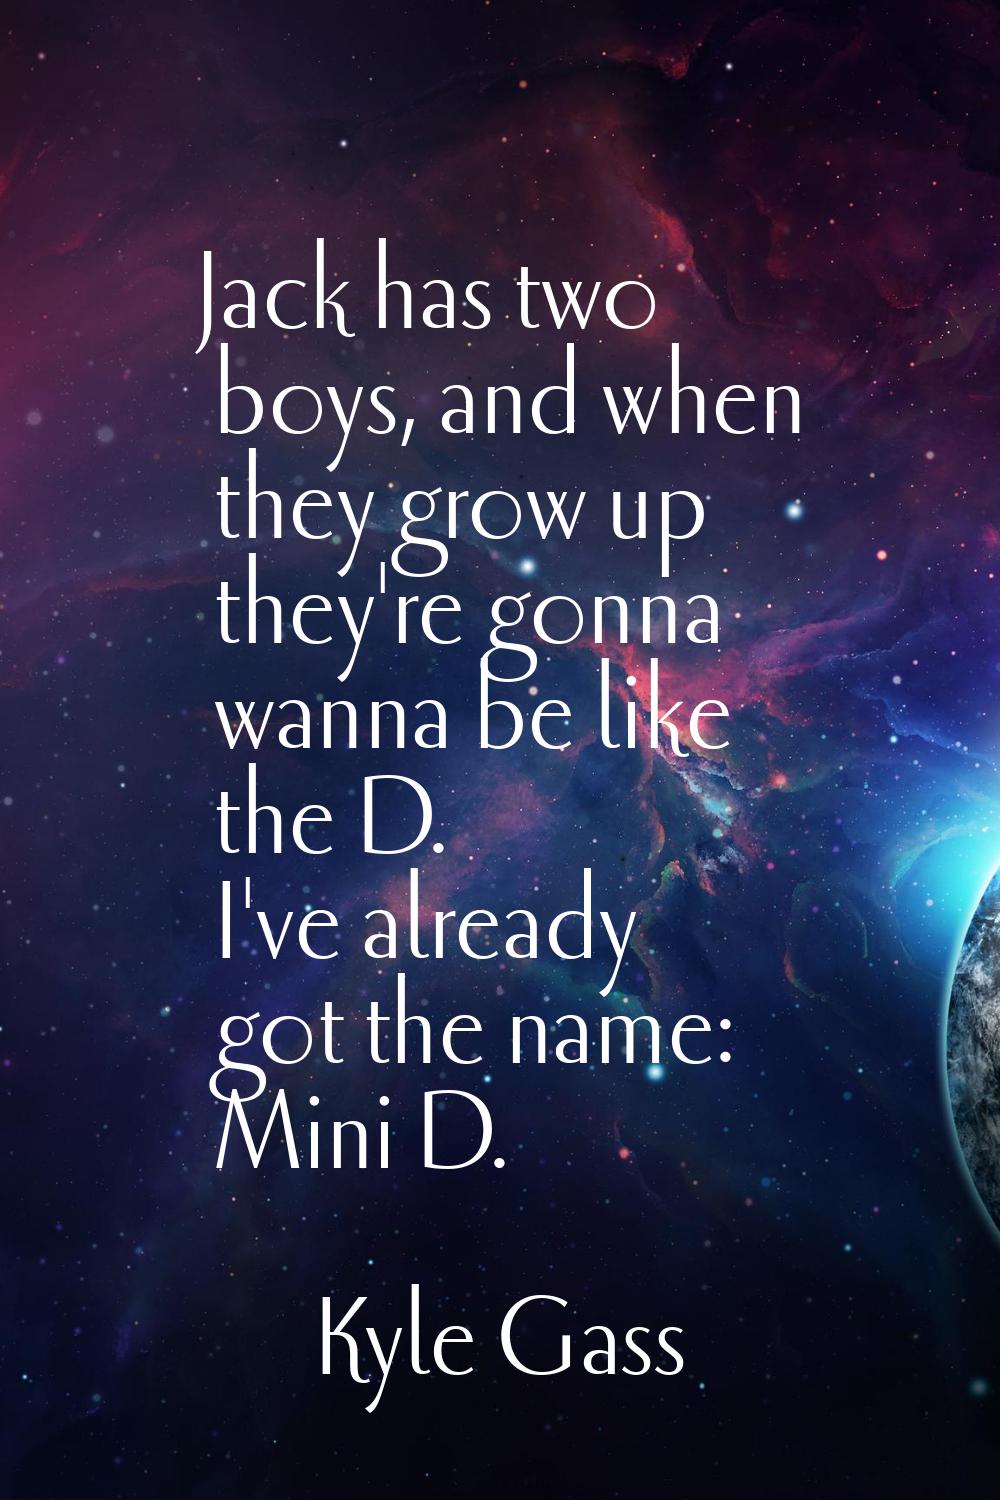 Jack has two boys, and when they grow up they're gonna wanna be like the D. I've already got the na